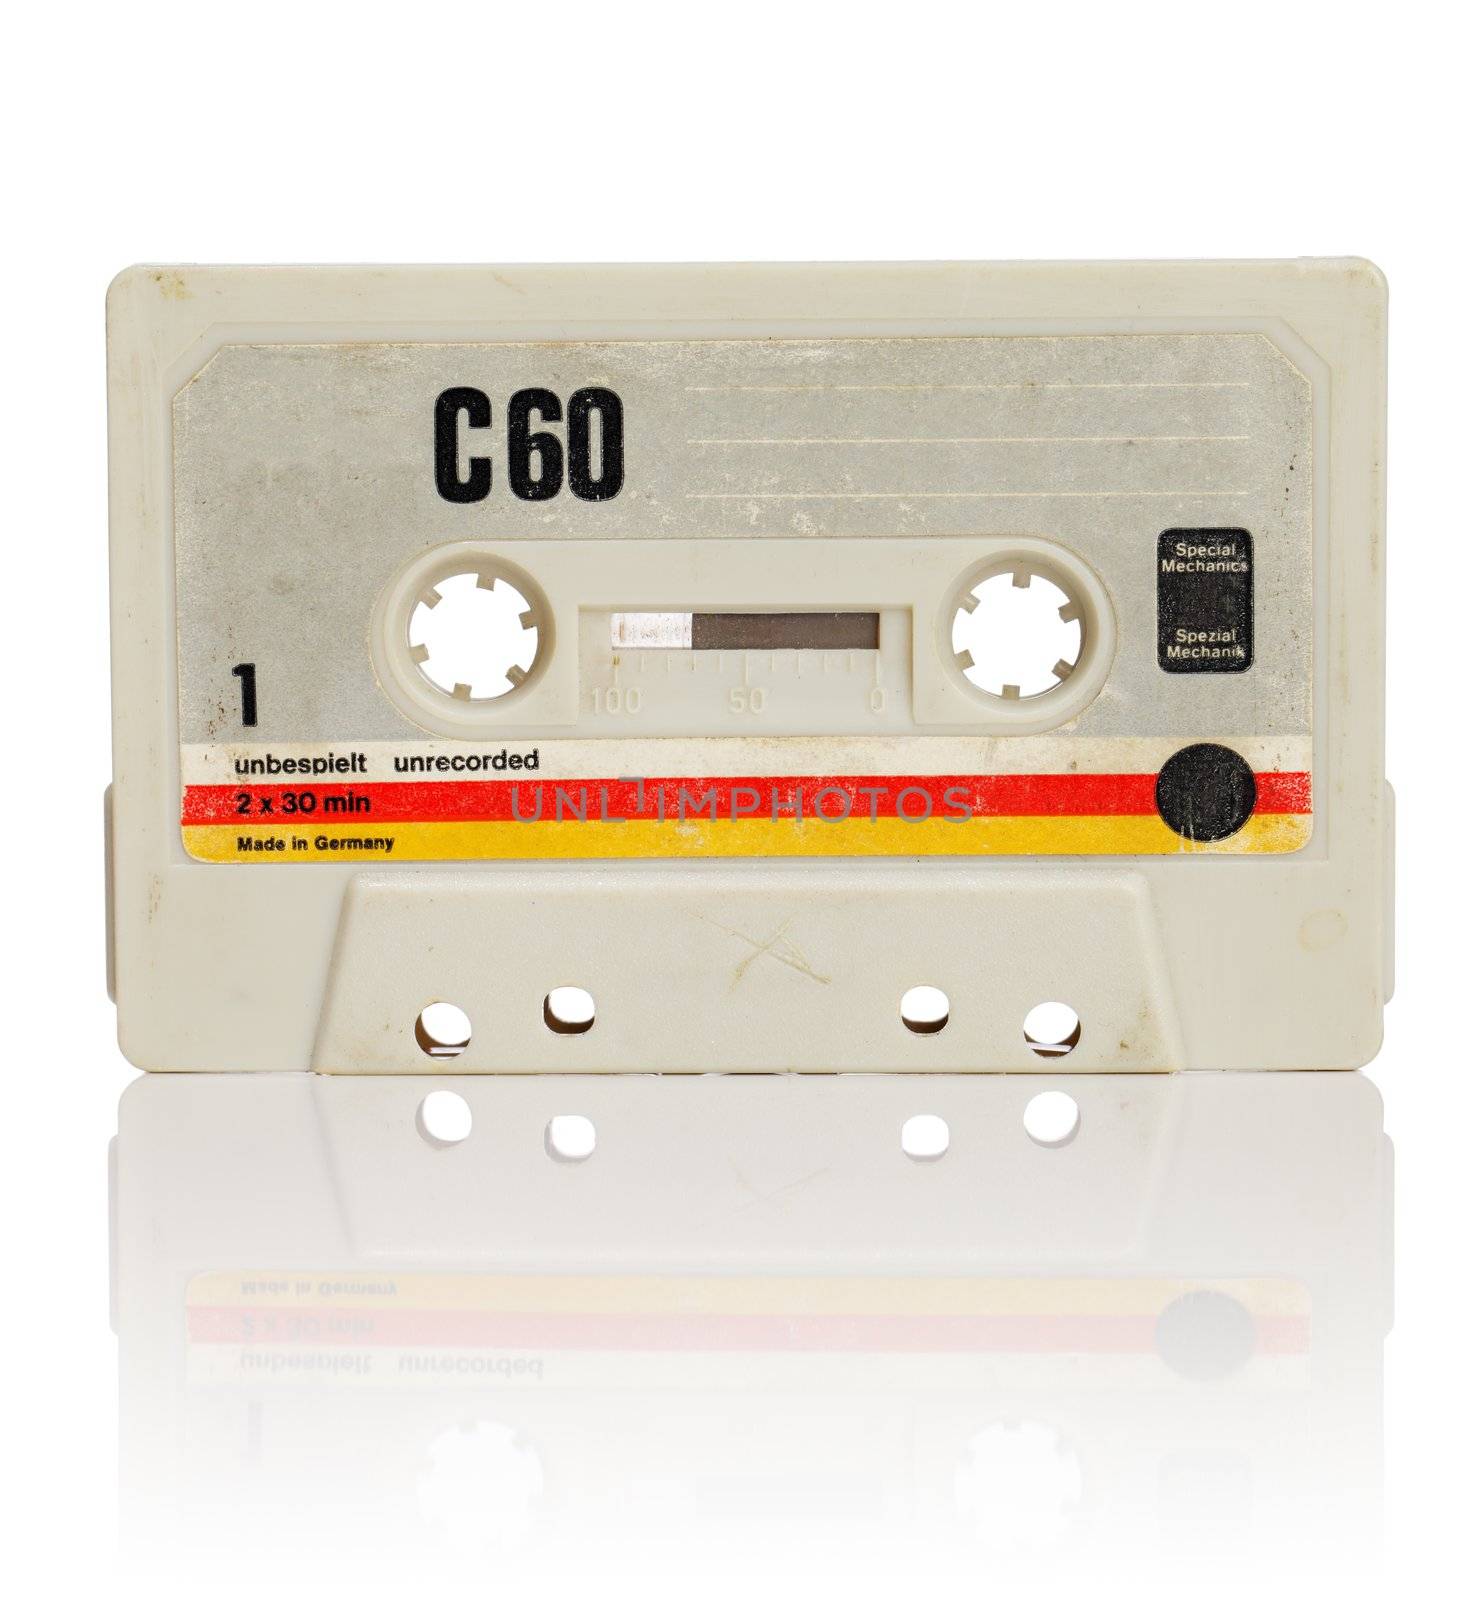 Compact Cassette by Stocksnapper